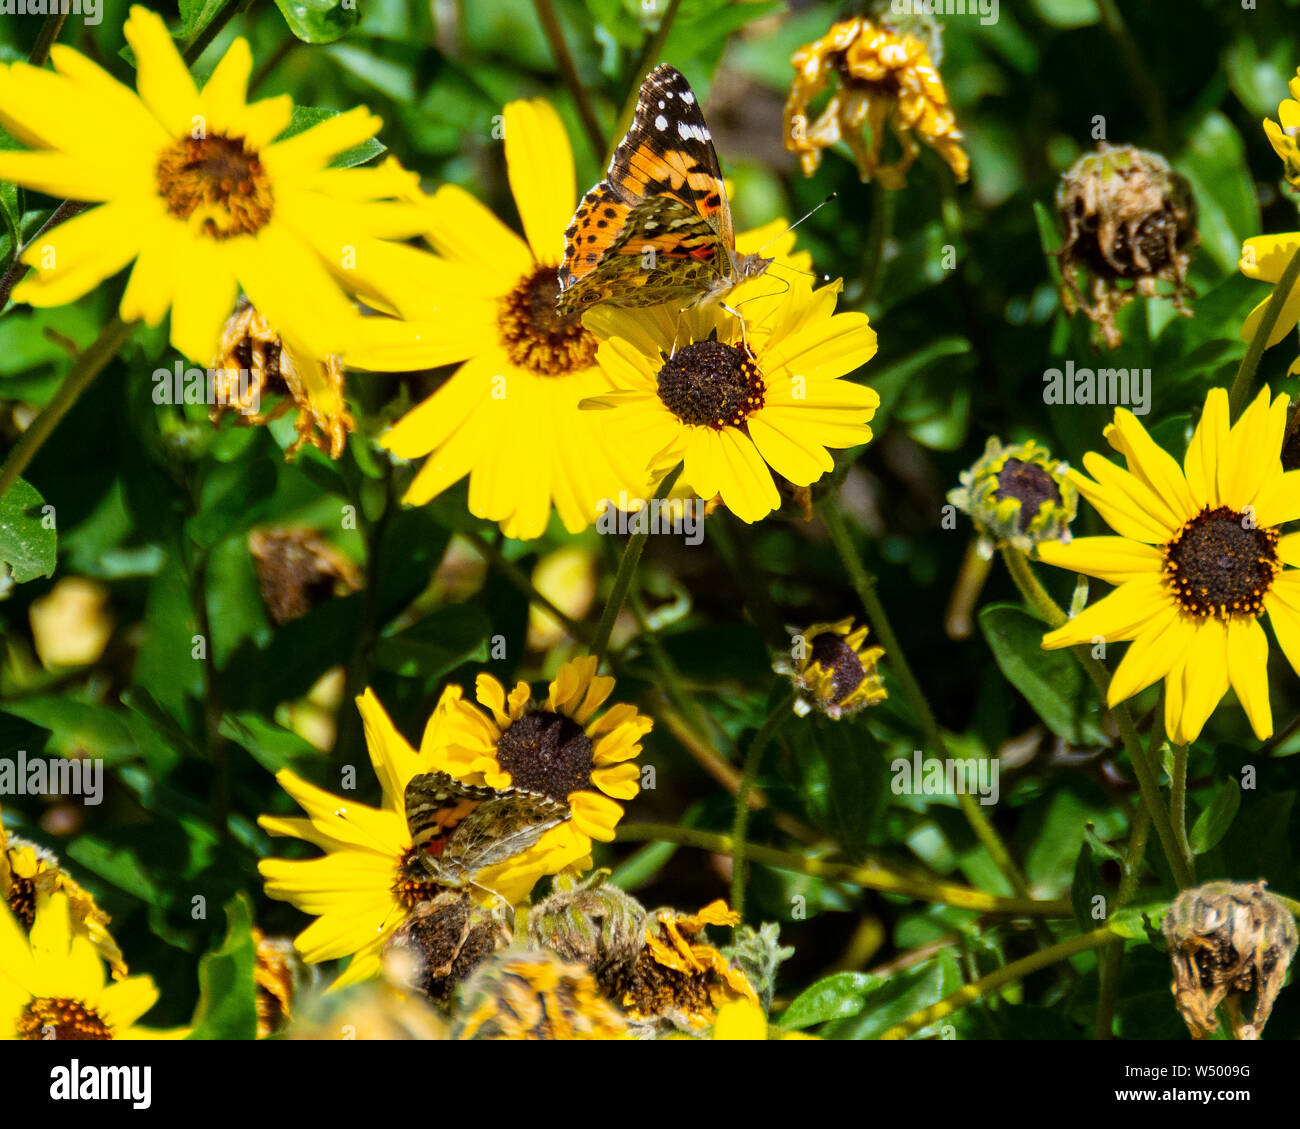 Closeup of a Painted Lady Butterfly perched on a California brittlebush flower. Stock Photo